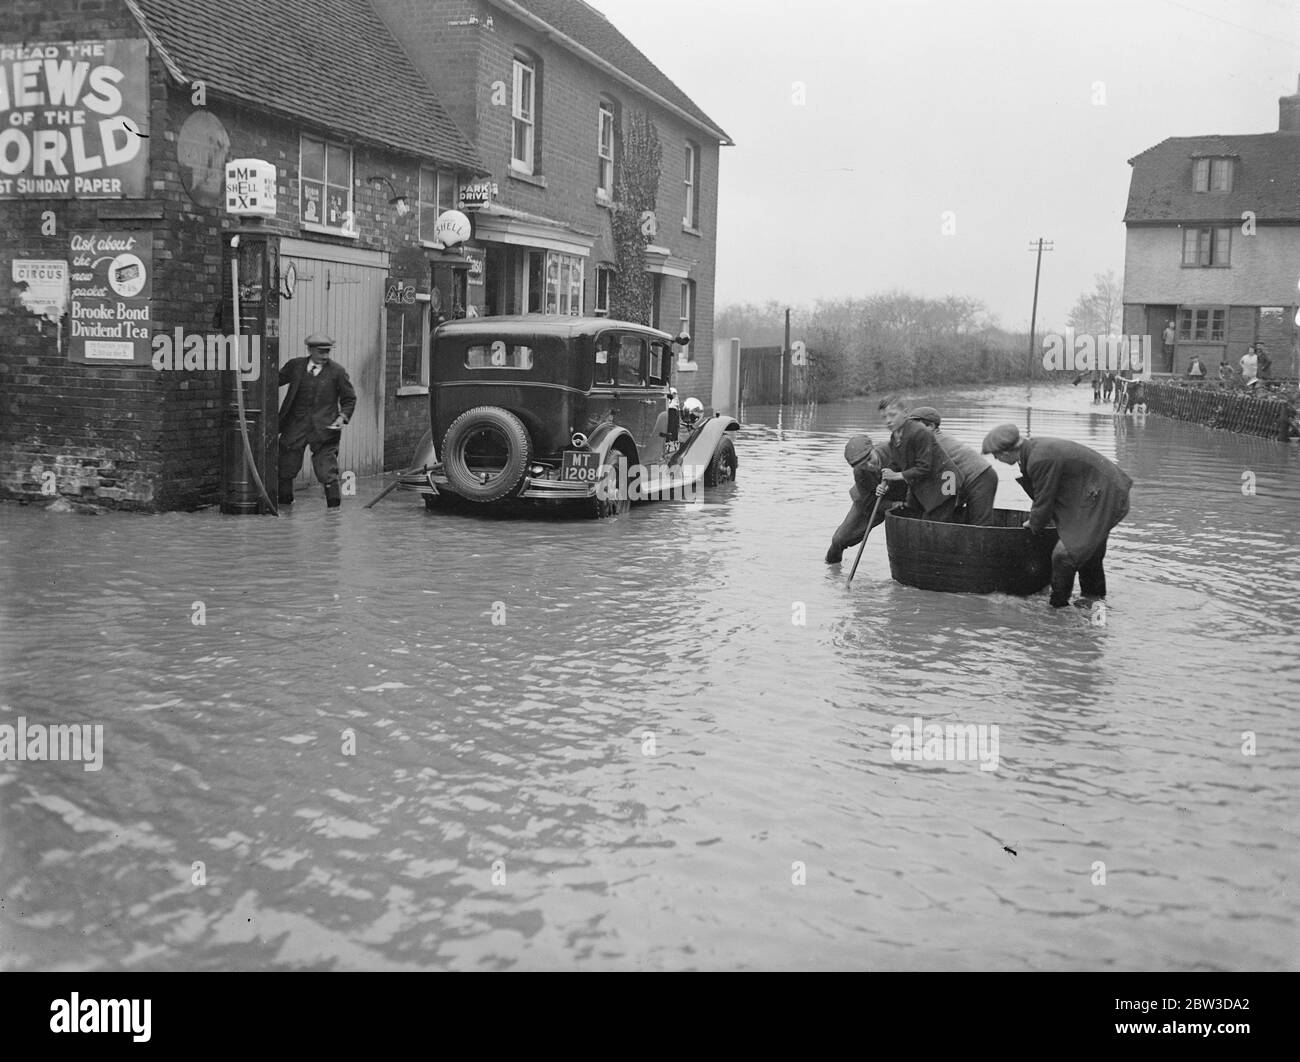 Where the bath tub beats the motorcars . Floods in Kent . A car filling up with petrol in flooded Yalding , Kent . The tub on right seems a more satisfactory means of transport under the circumstances . 18 November 1935 Stock Photo